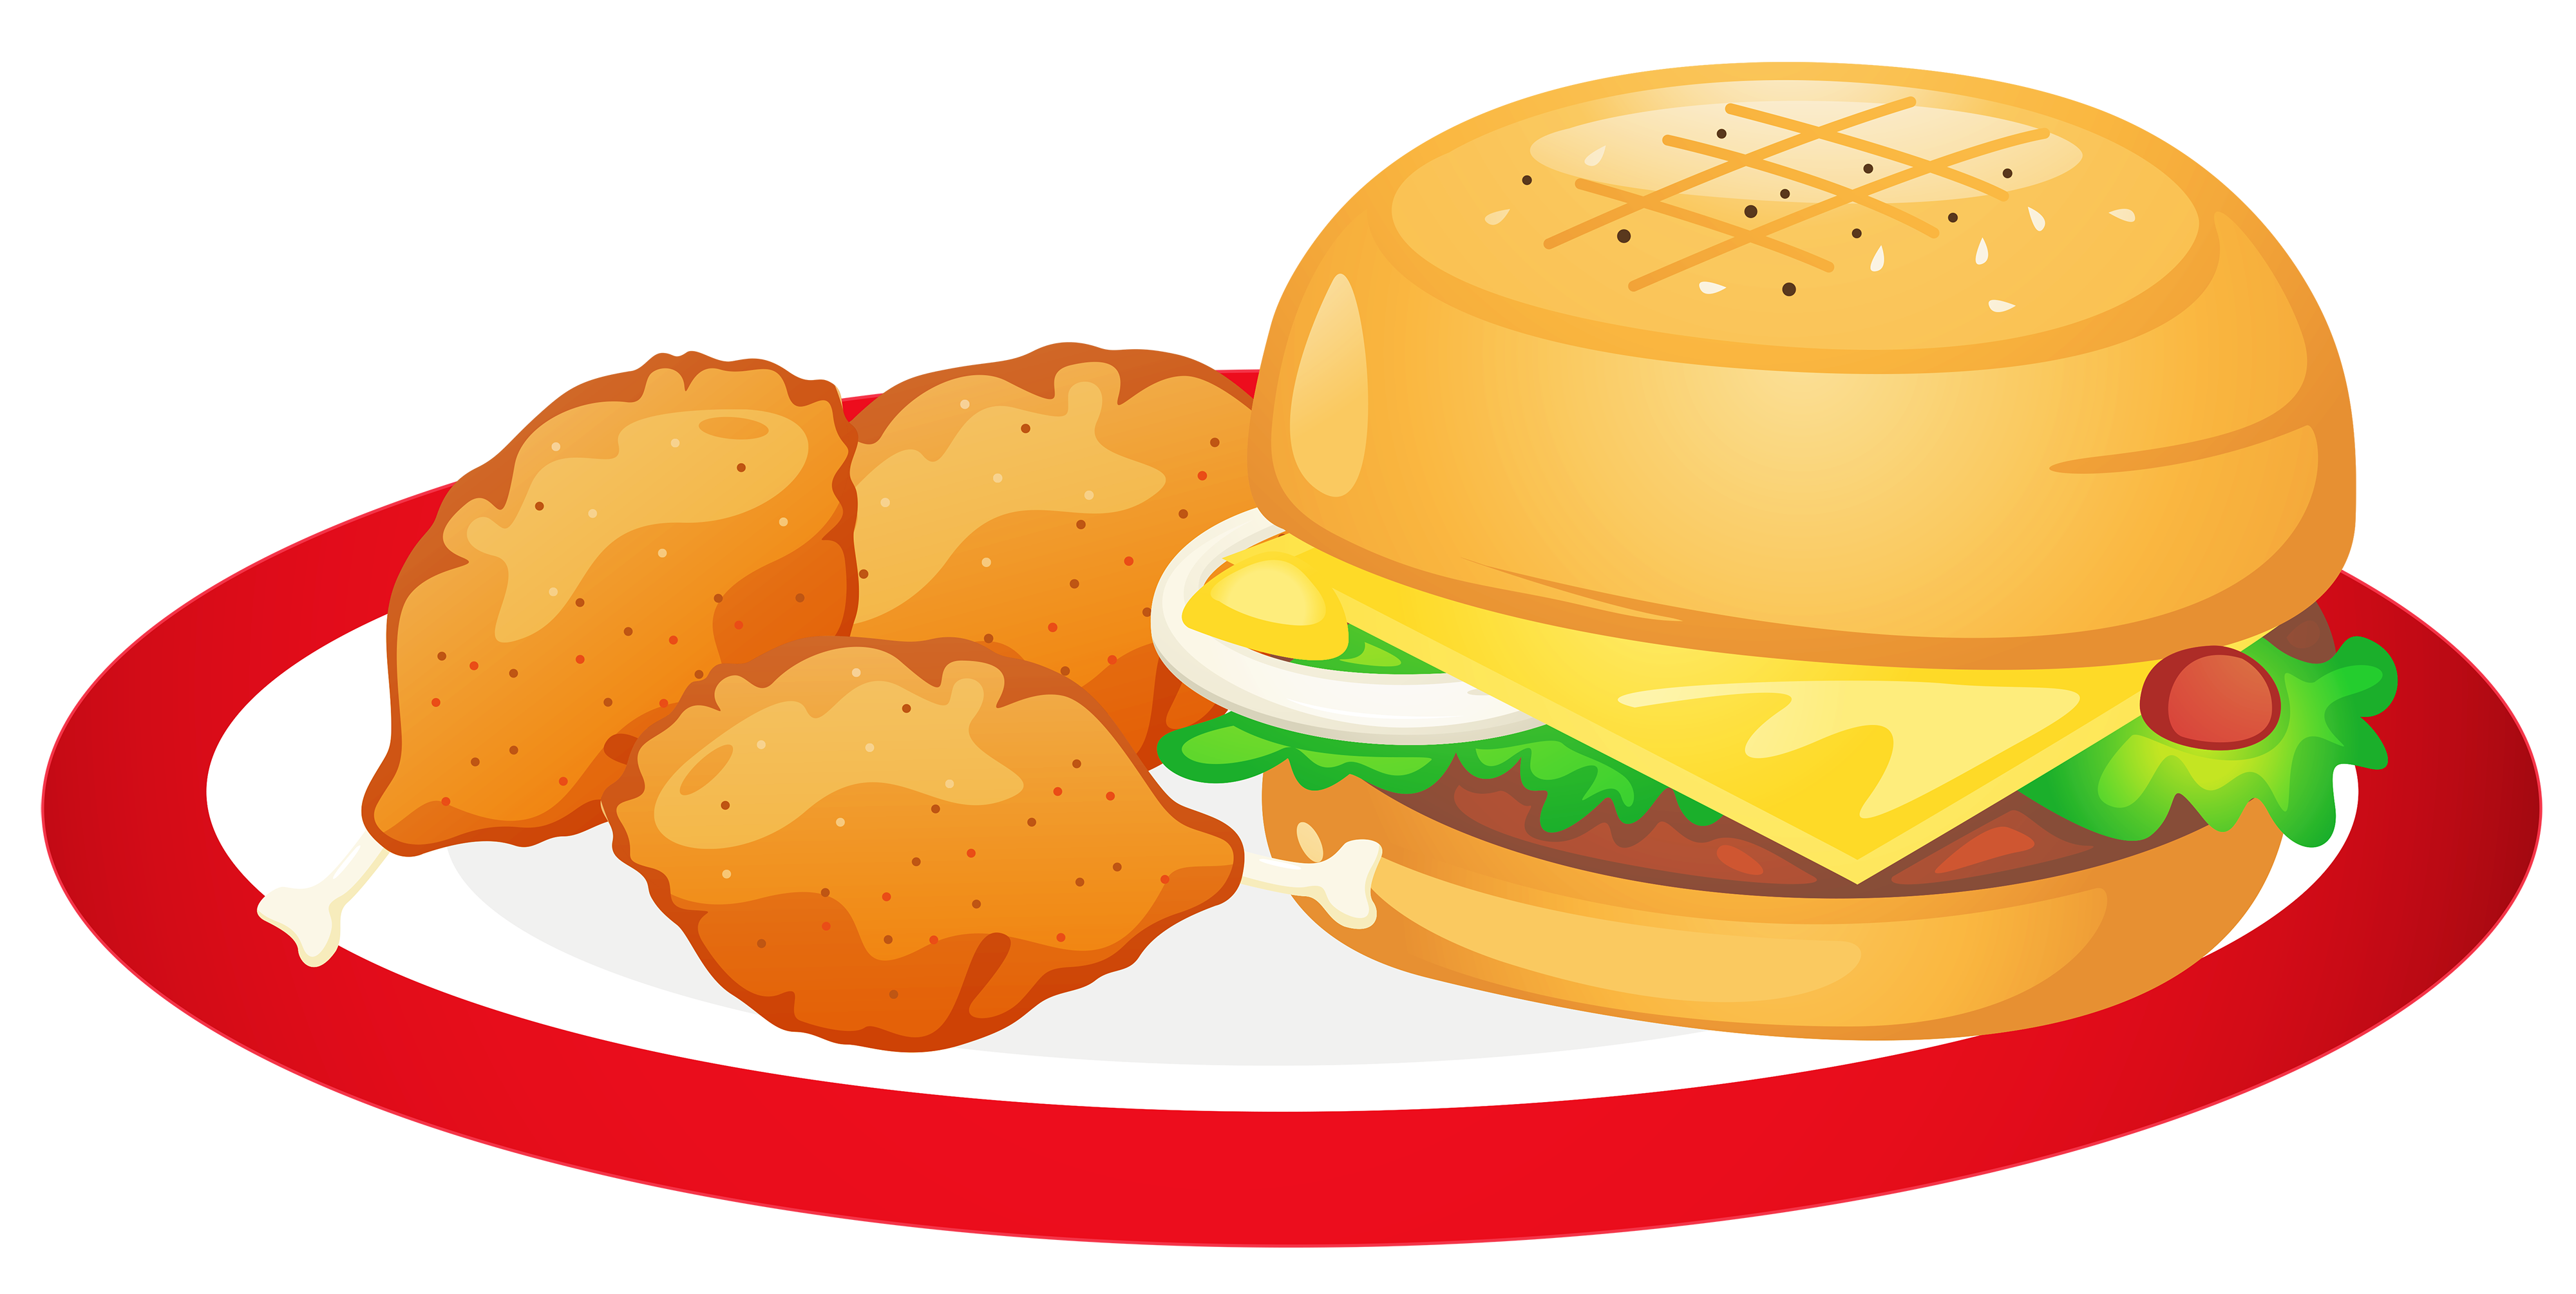 Plate Of Food Clip Art - ClipArt Best